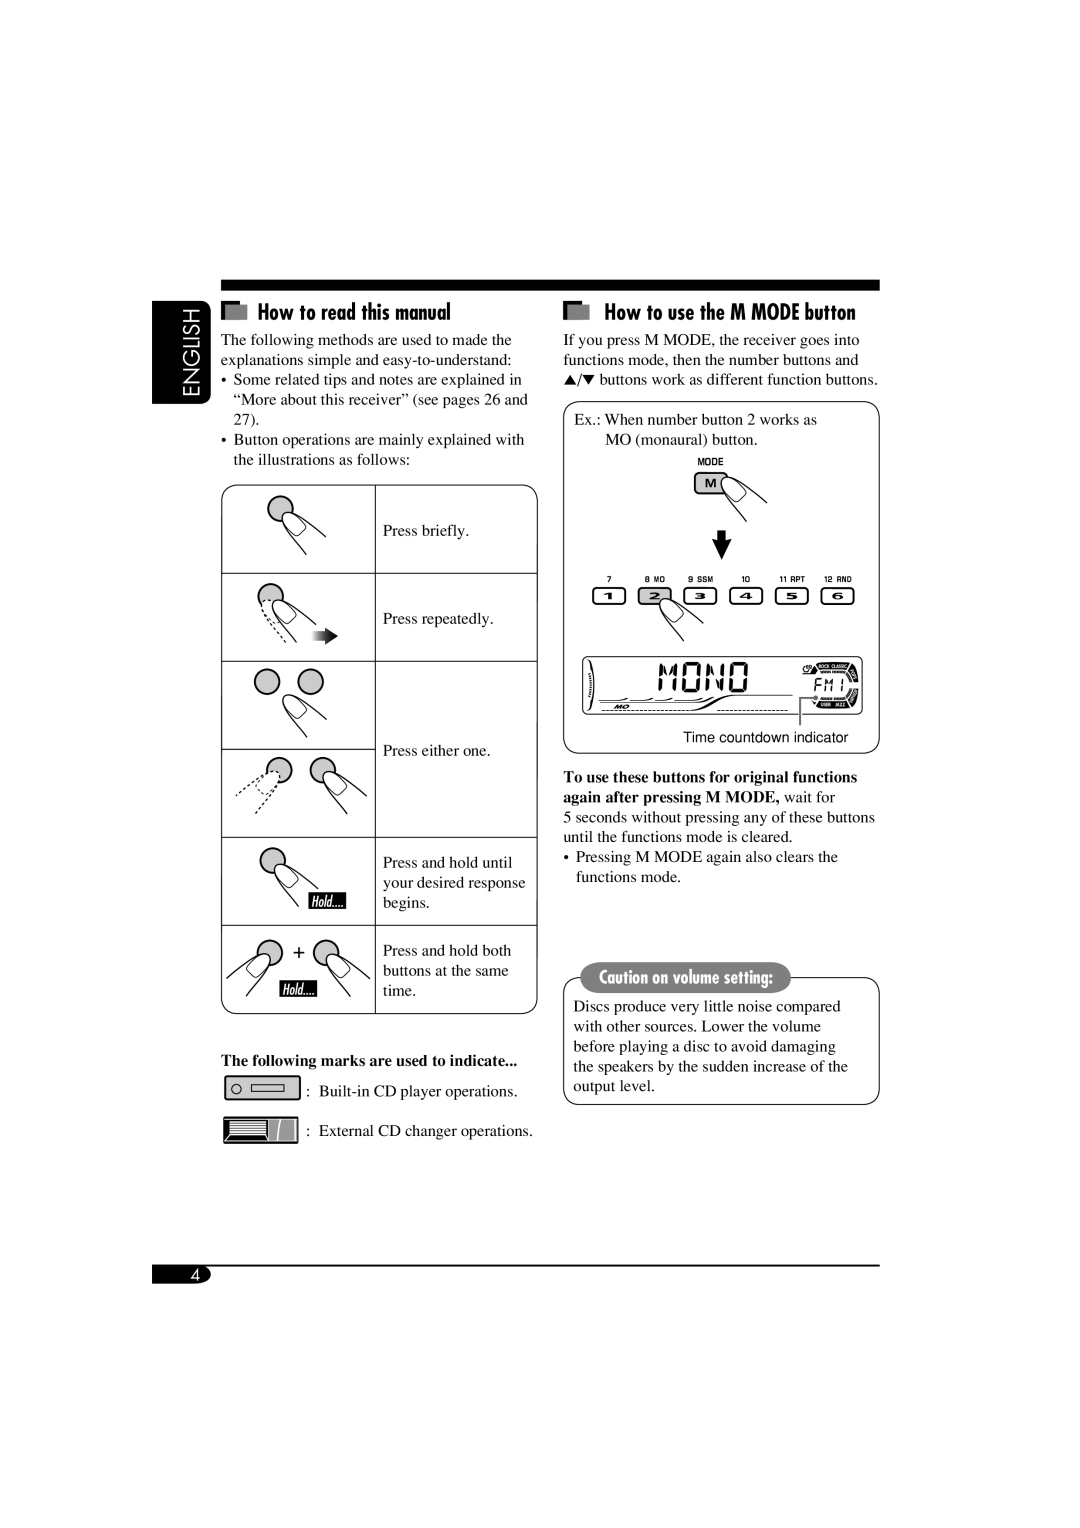 JVC KD-G515 How to read this manual, How to use the M MODE button, English, Caution on volume setting 